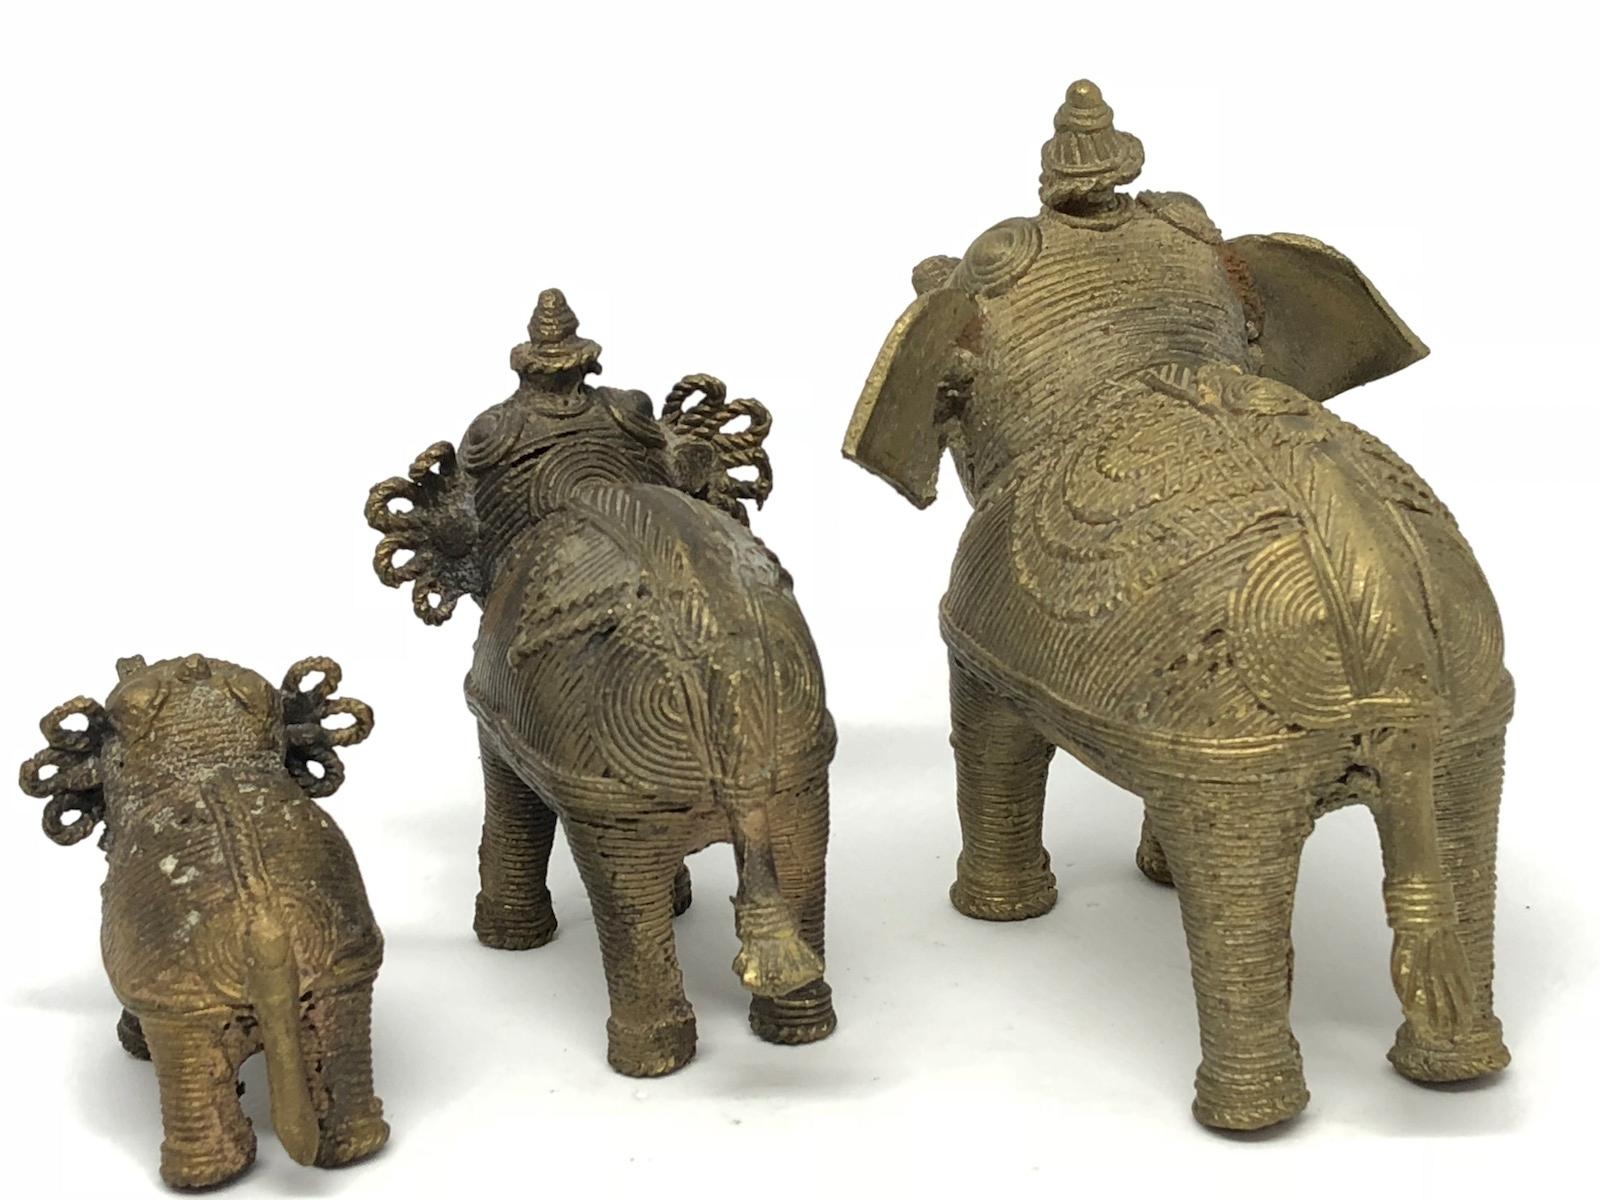 Hand-Crafted Lot of Three Asian Elephant Brass Sculpture Figures Vintage, 1950s